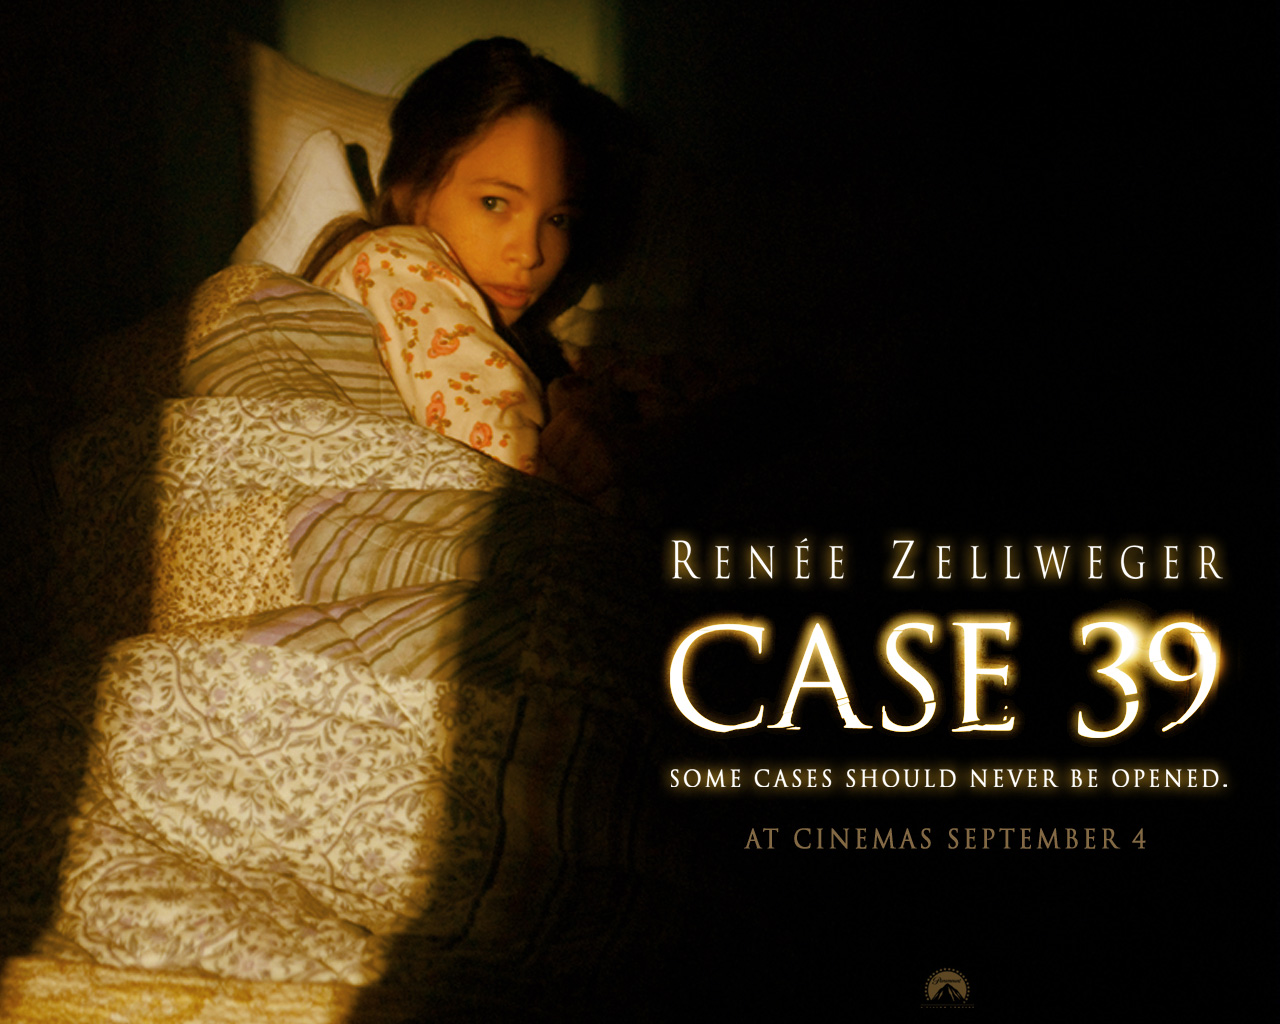 Case 39 movie review